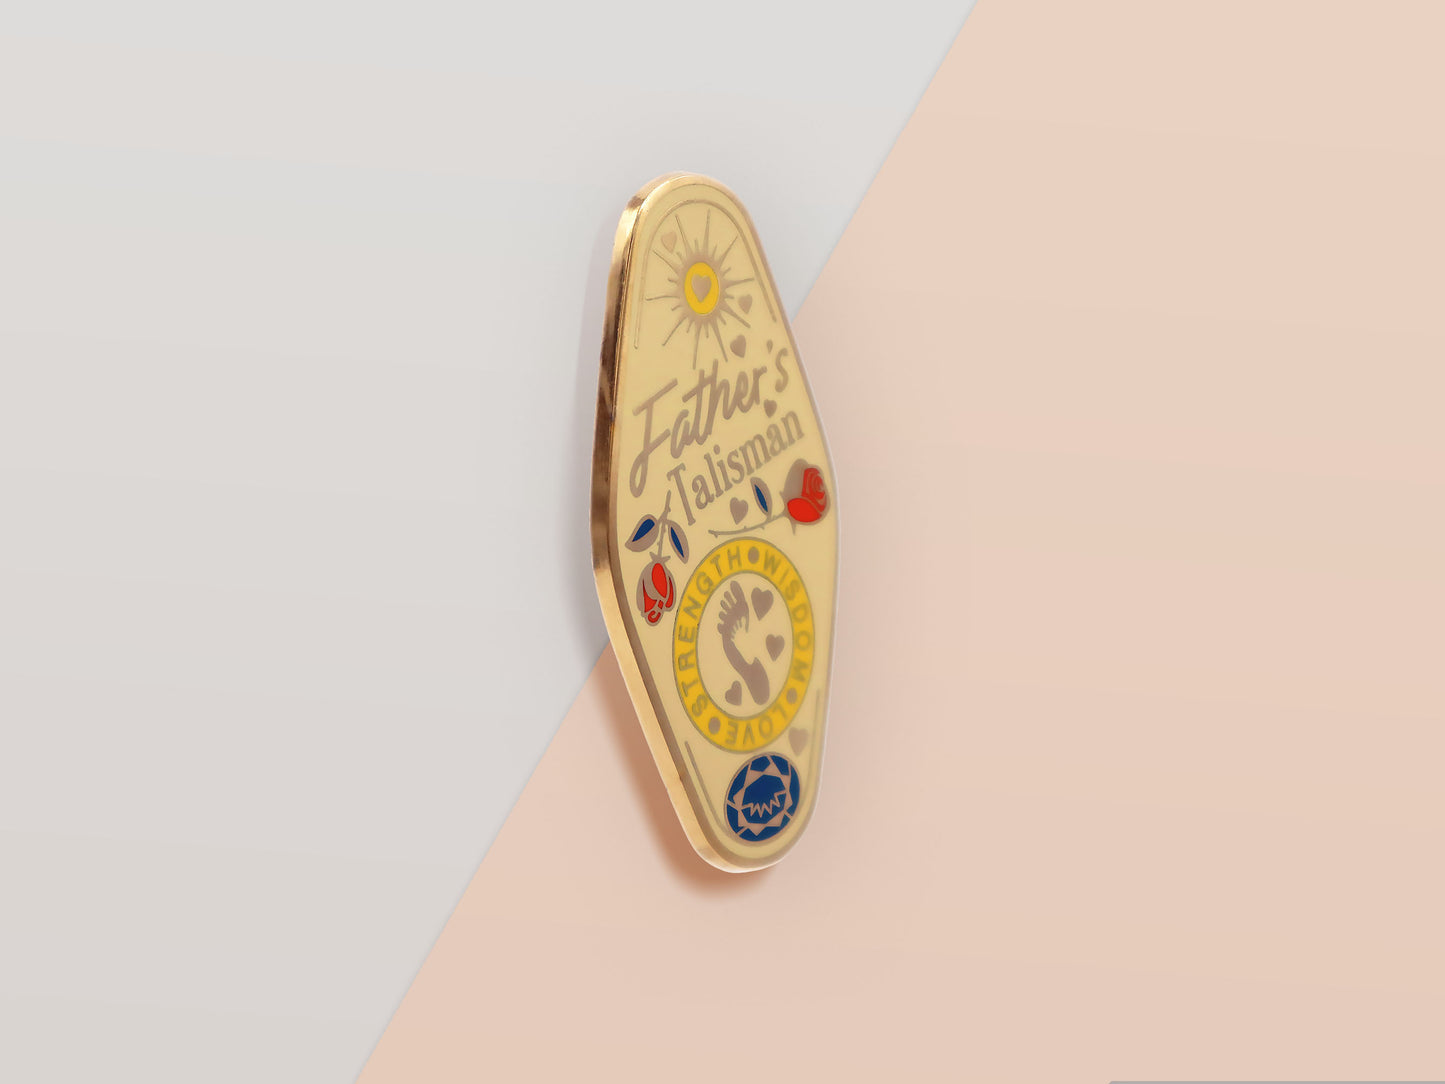 Gold Enamel Talisman Pin with yellow design and the words Father's Talisman, Strength Wisdom Love. The pins design includes a fathers and child's footprint, sunshine, hearts, as well as flowers and crystals.